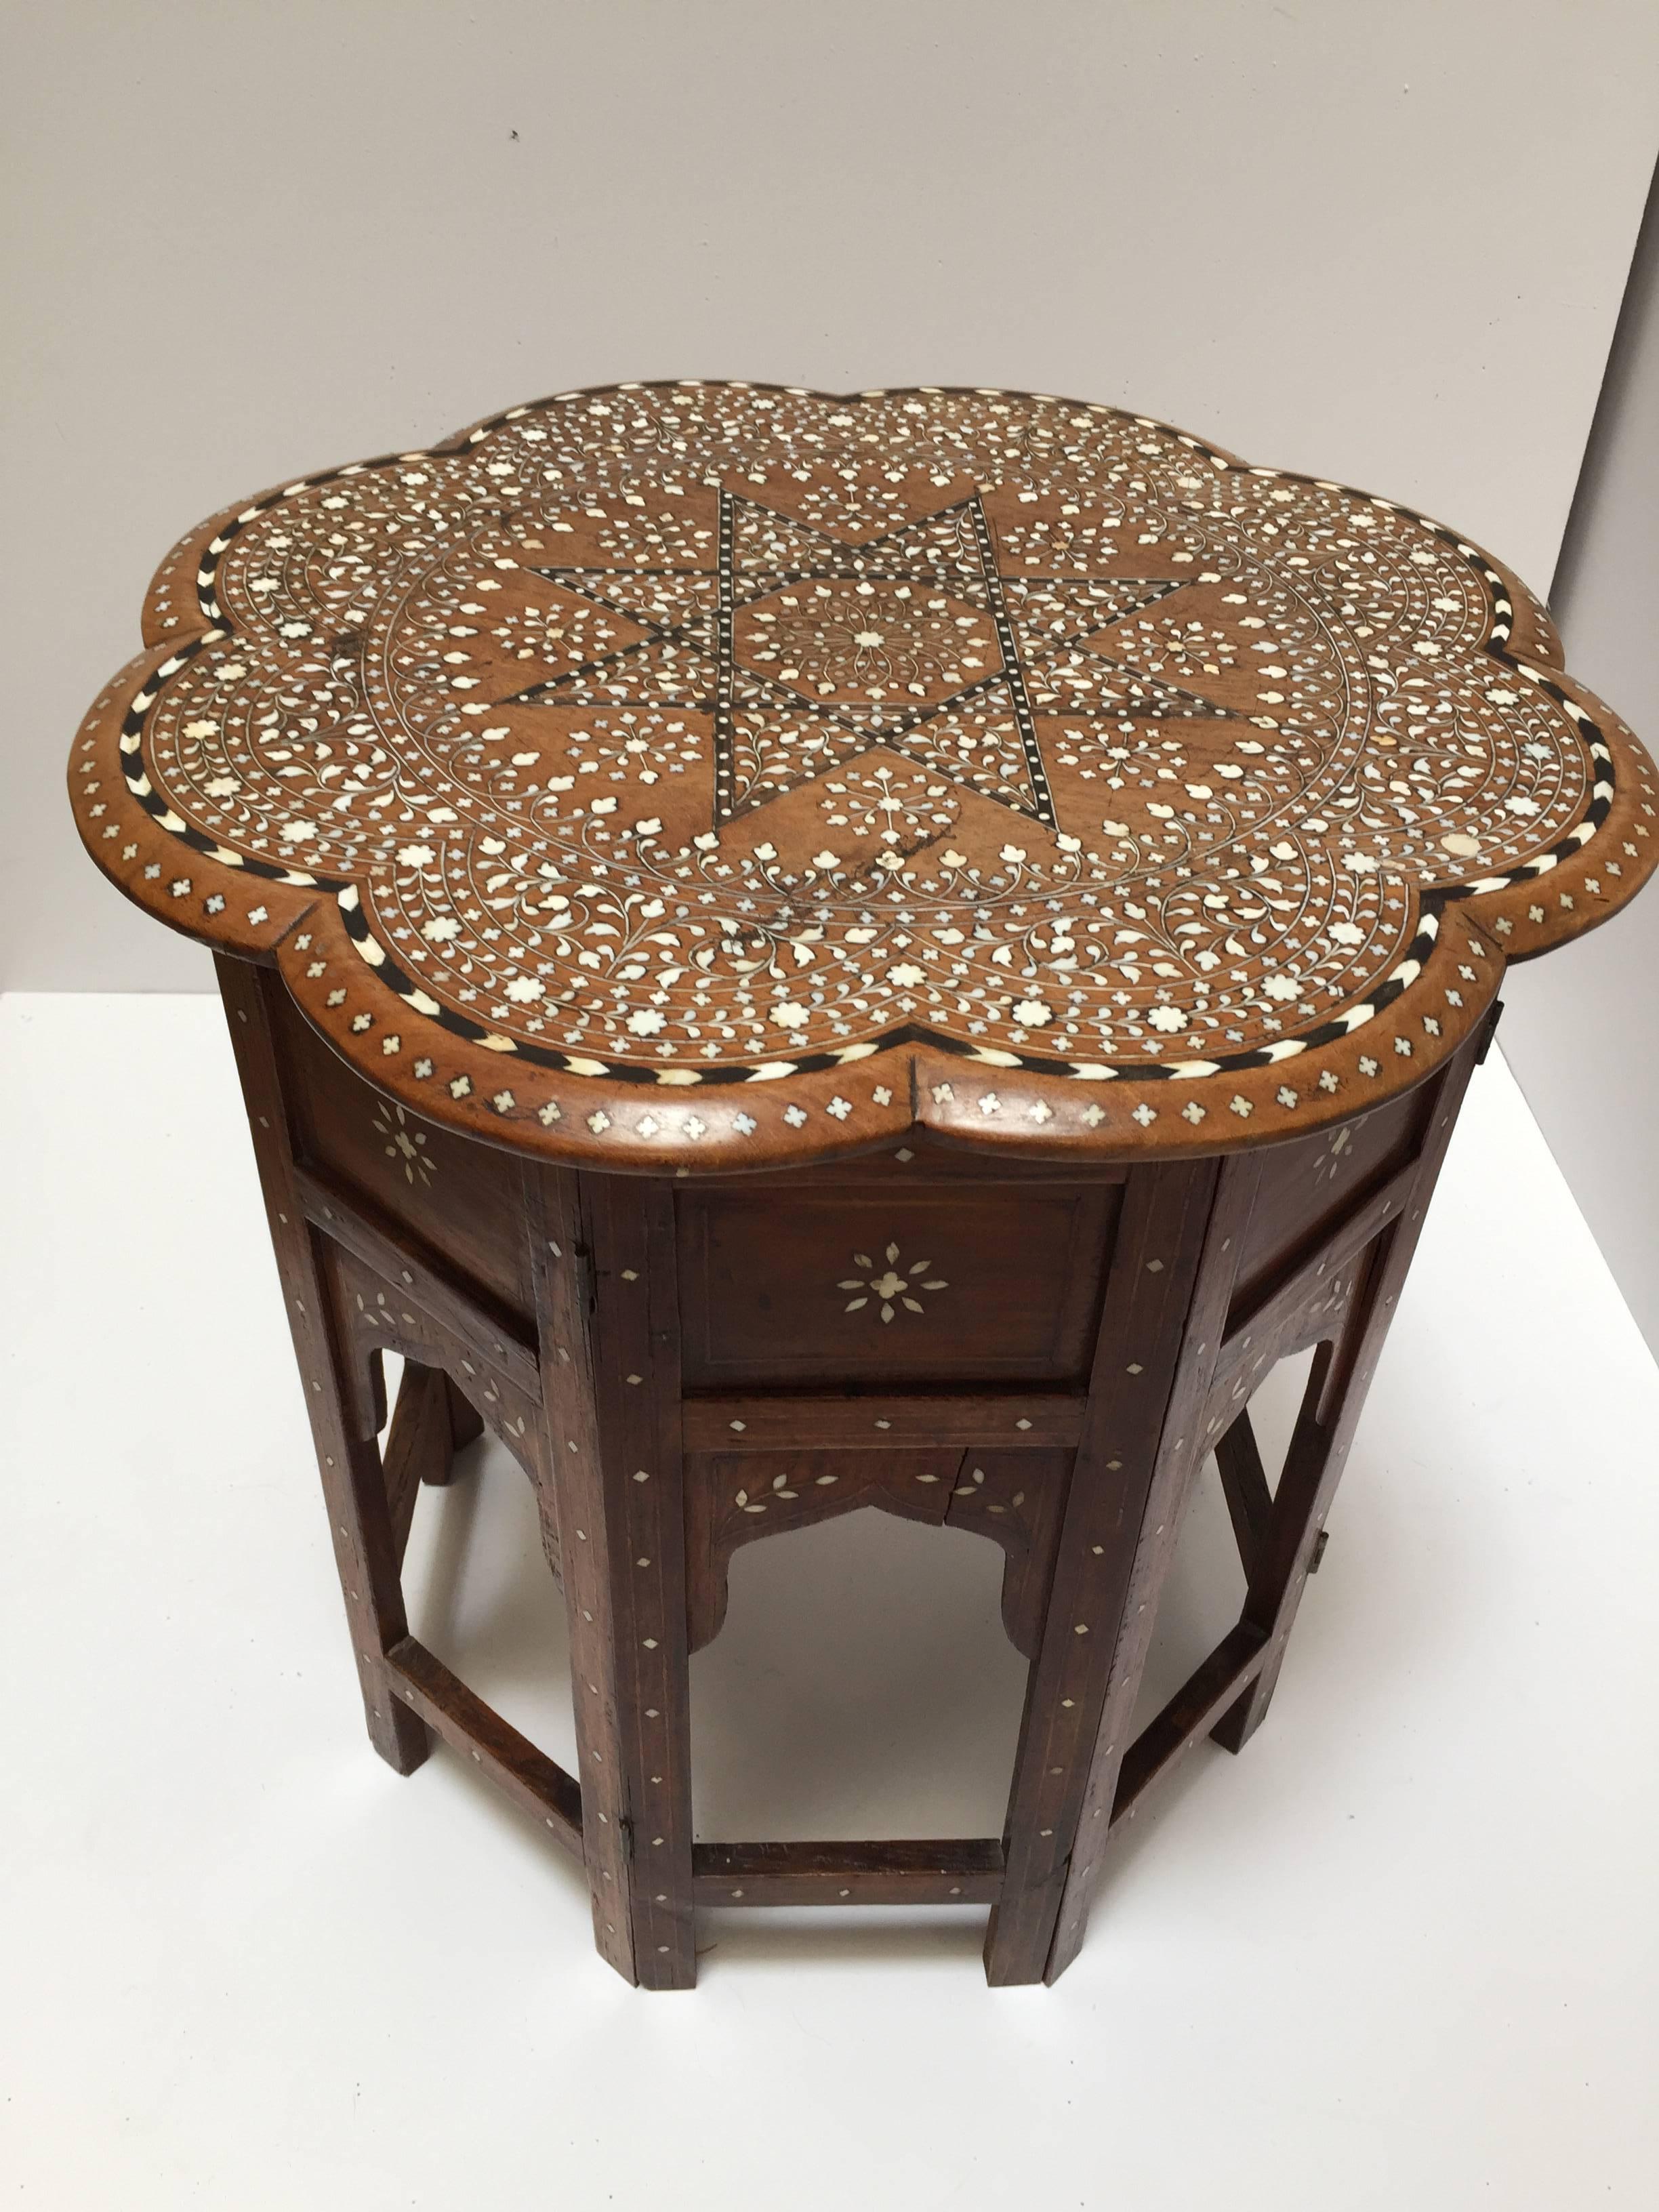 Large fine and elegant Hoshiarpur Anglo-Indian rosewood table with elaborate bone and ebony inlay.
A finely inlaid Anglo-Indian traveling table, the flower shape top centering an inlaid stylized eight pointed star medallion within a foliate band